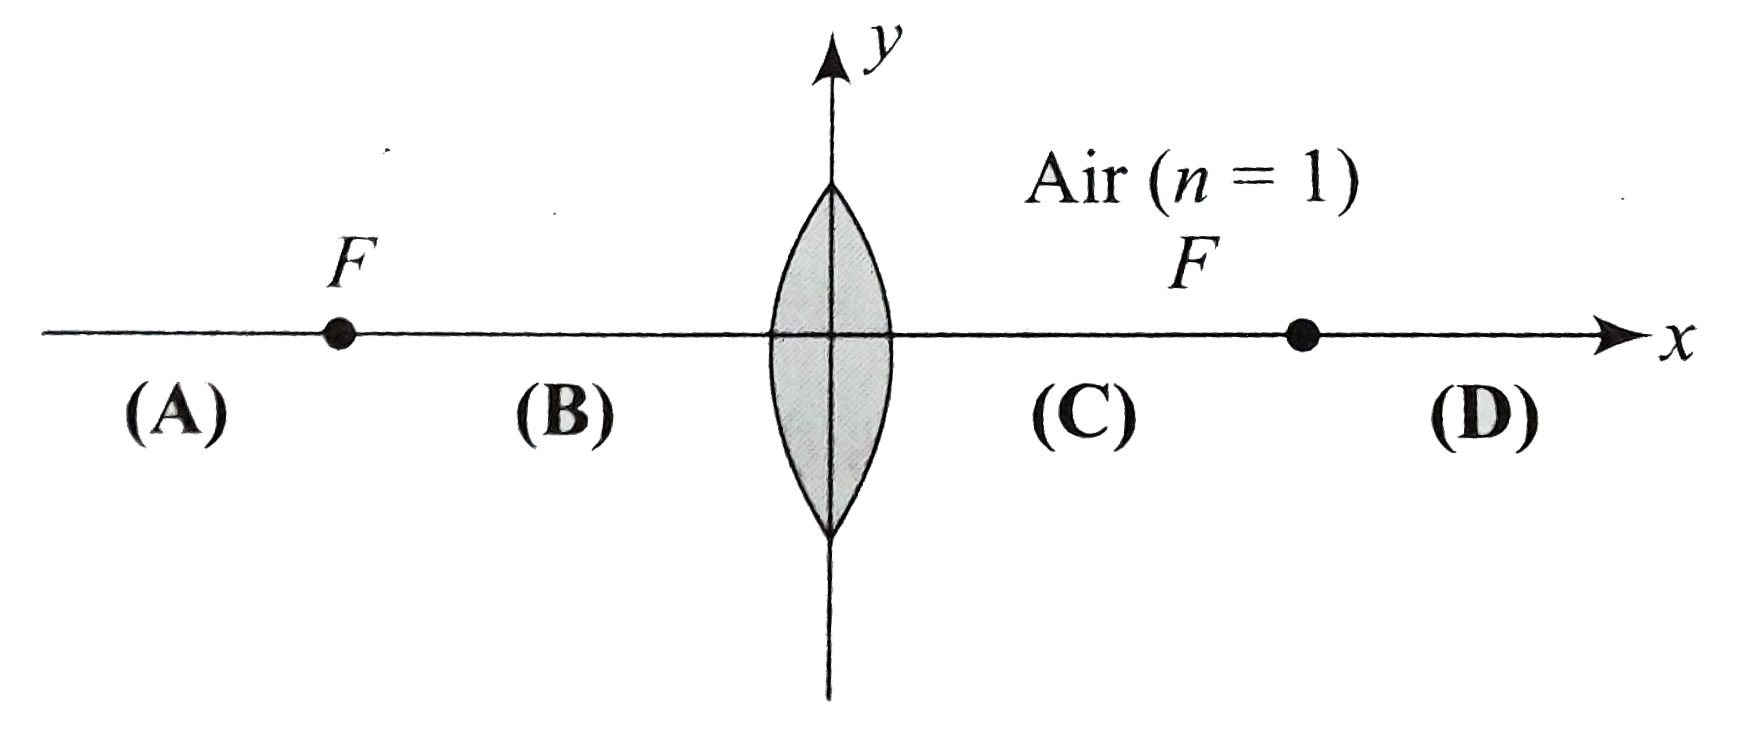 This question concerna a symmetrical lens shown, along with its two focal points. It is made of plastice with n=1.2 and has focal length f. Four different regions are shown:    Here,    A. -oox lt -f    B.  -f lt x lt 0   C. 0 lt x lt f   D. f lt x lt oo      Q. If an object is placed somewhere region (A),  in which region does the image appear ?